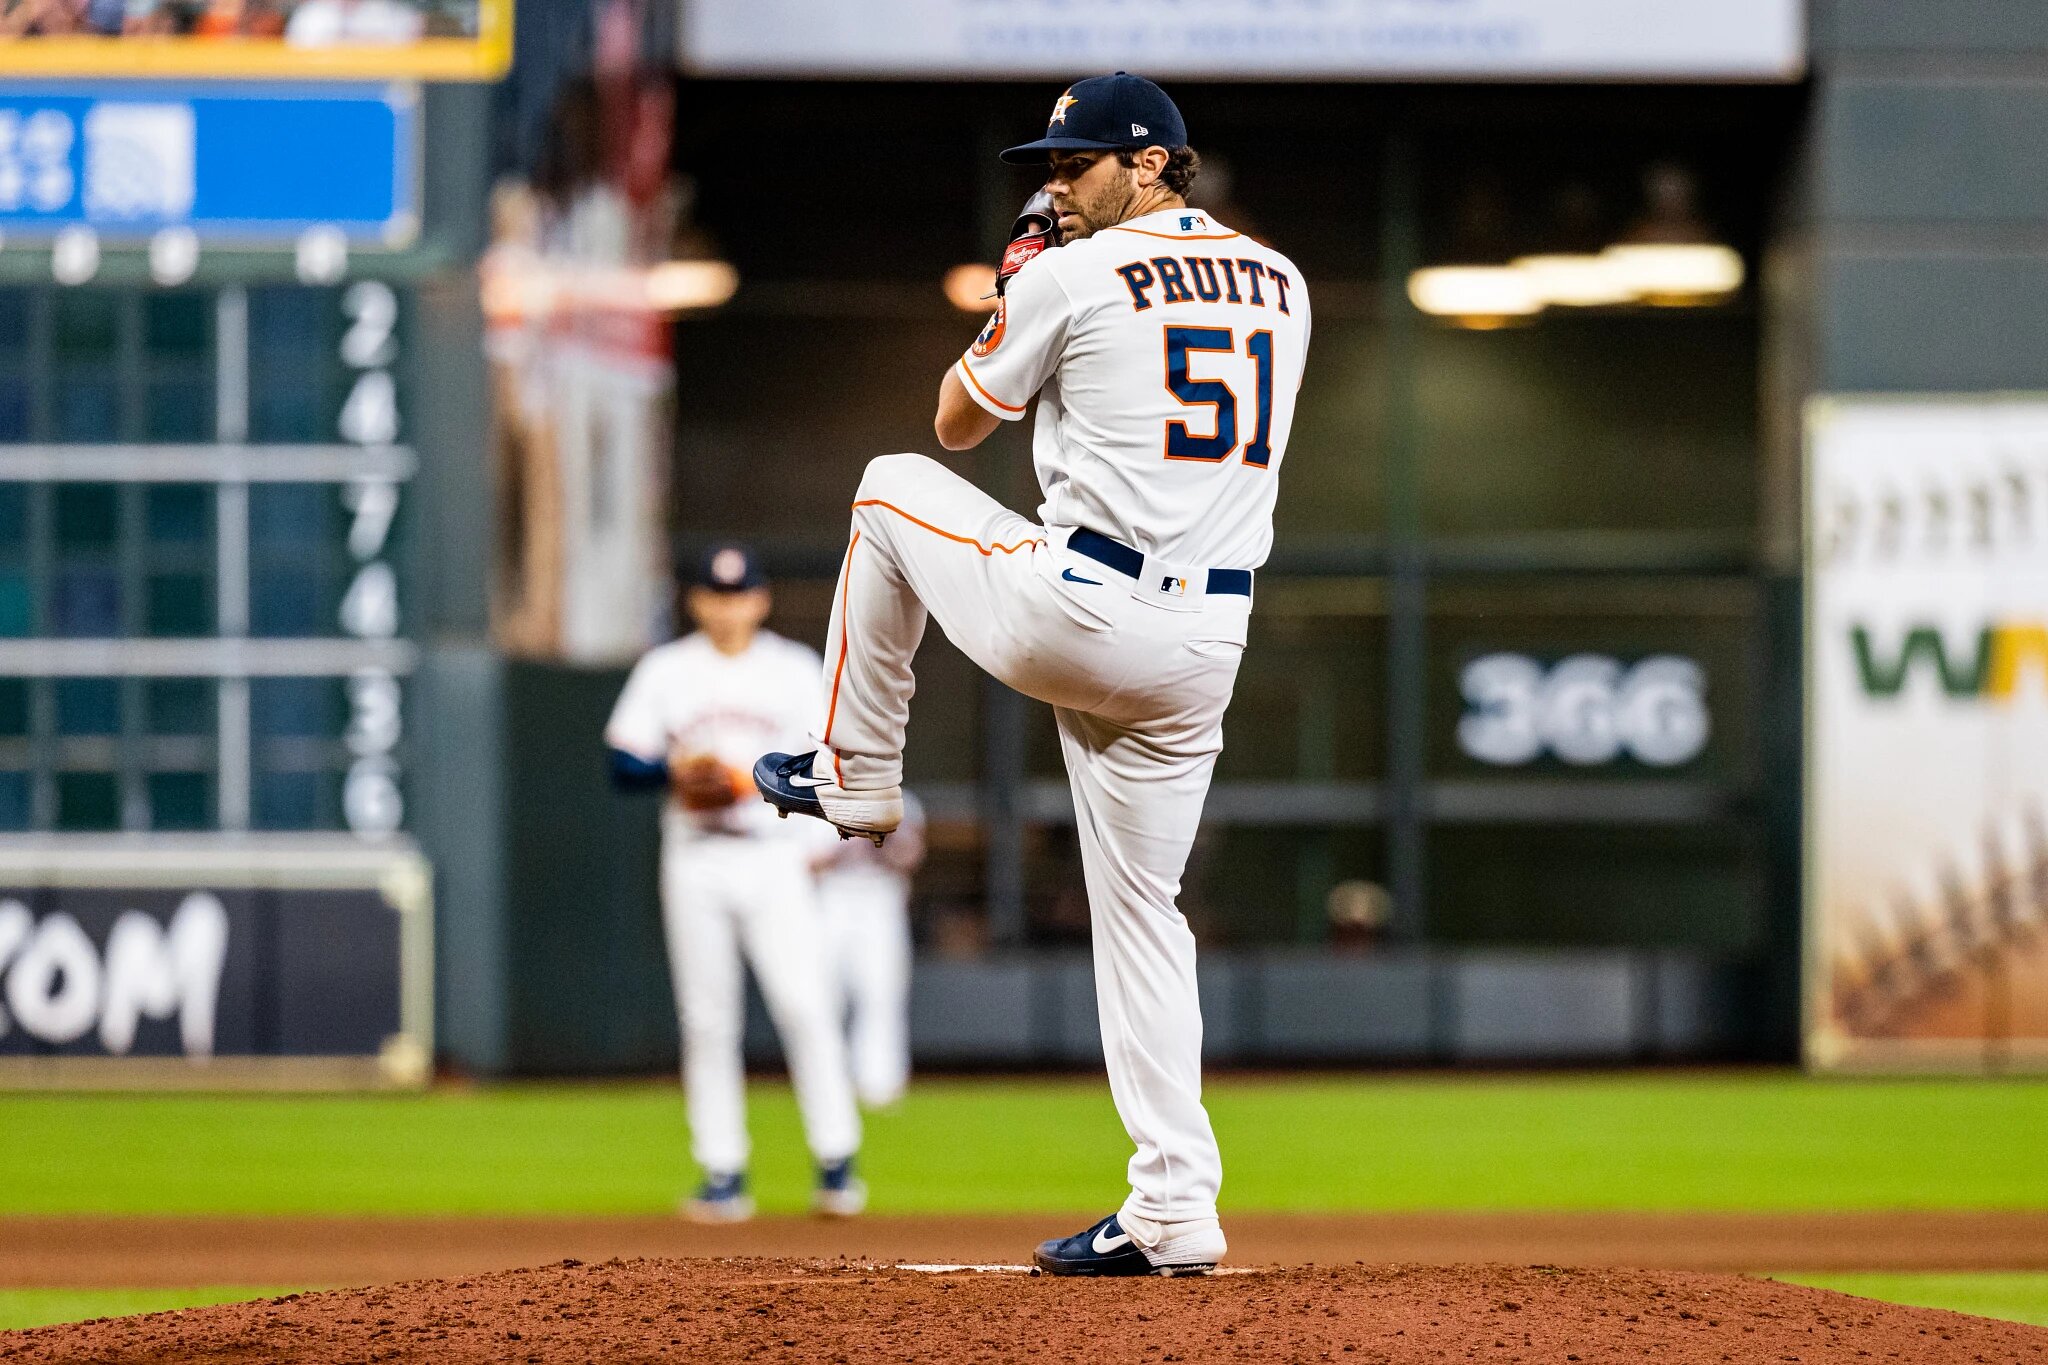 Former UH baseball right-handed pitcher Austin Pruitt makes his home debut as an Astro on July 21 against the Indians. | Courtesy of the Houston Astros